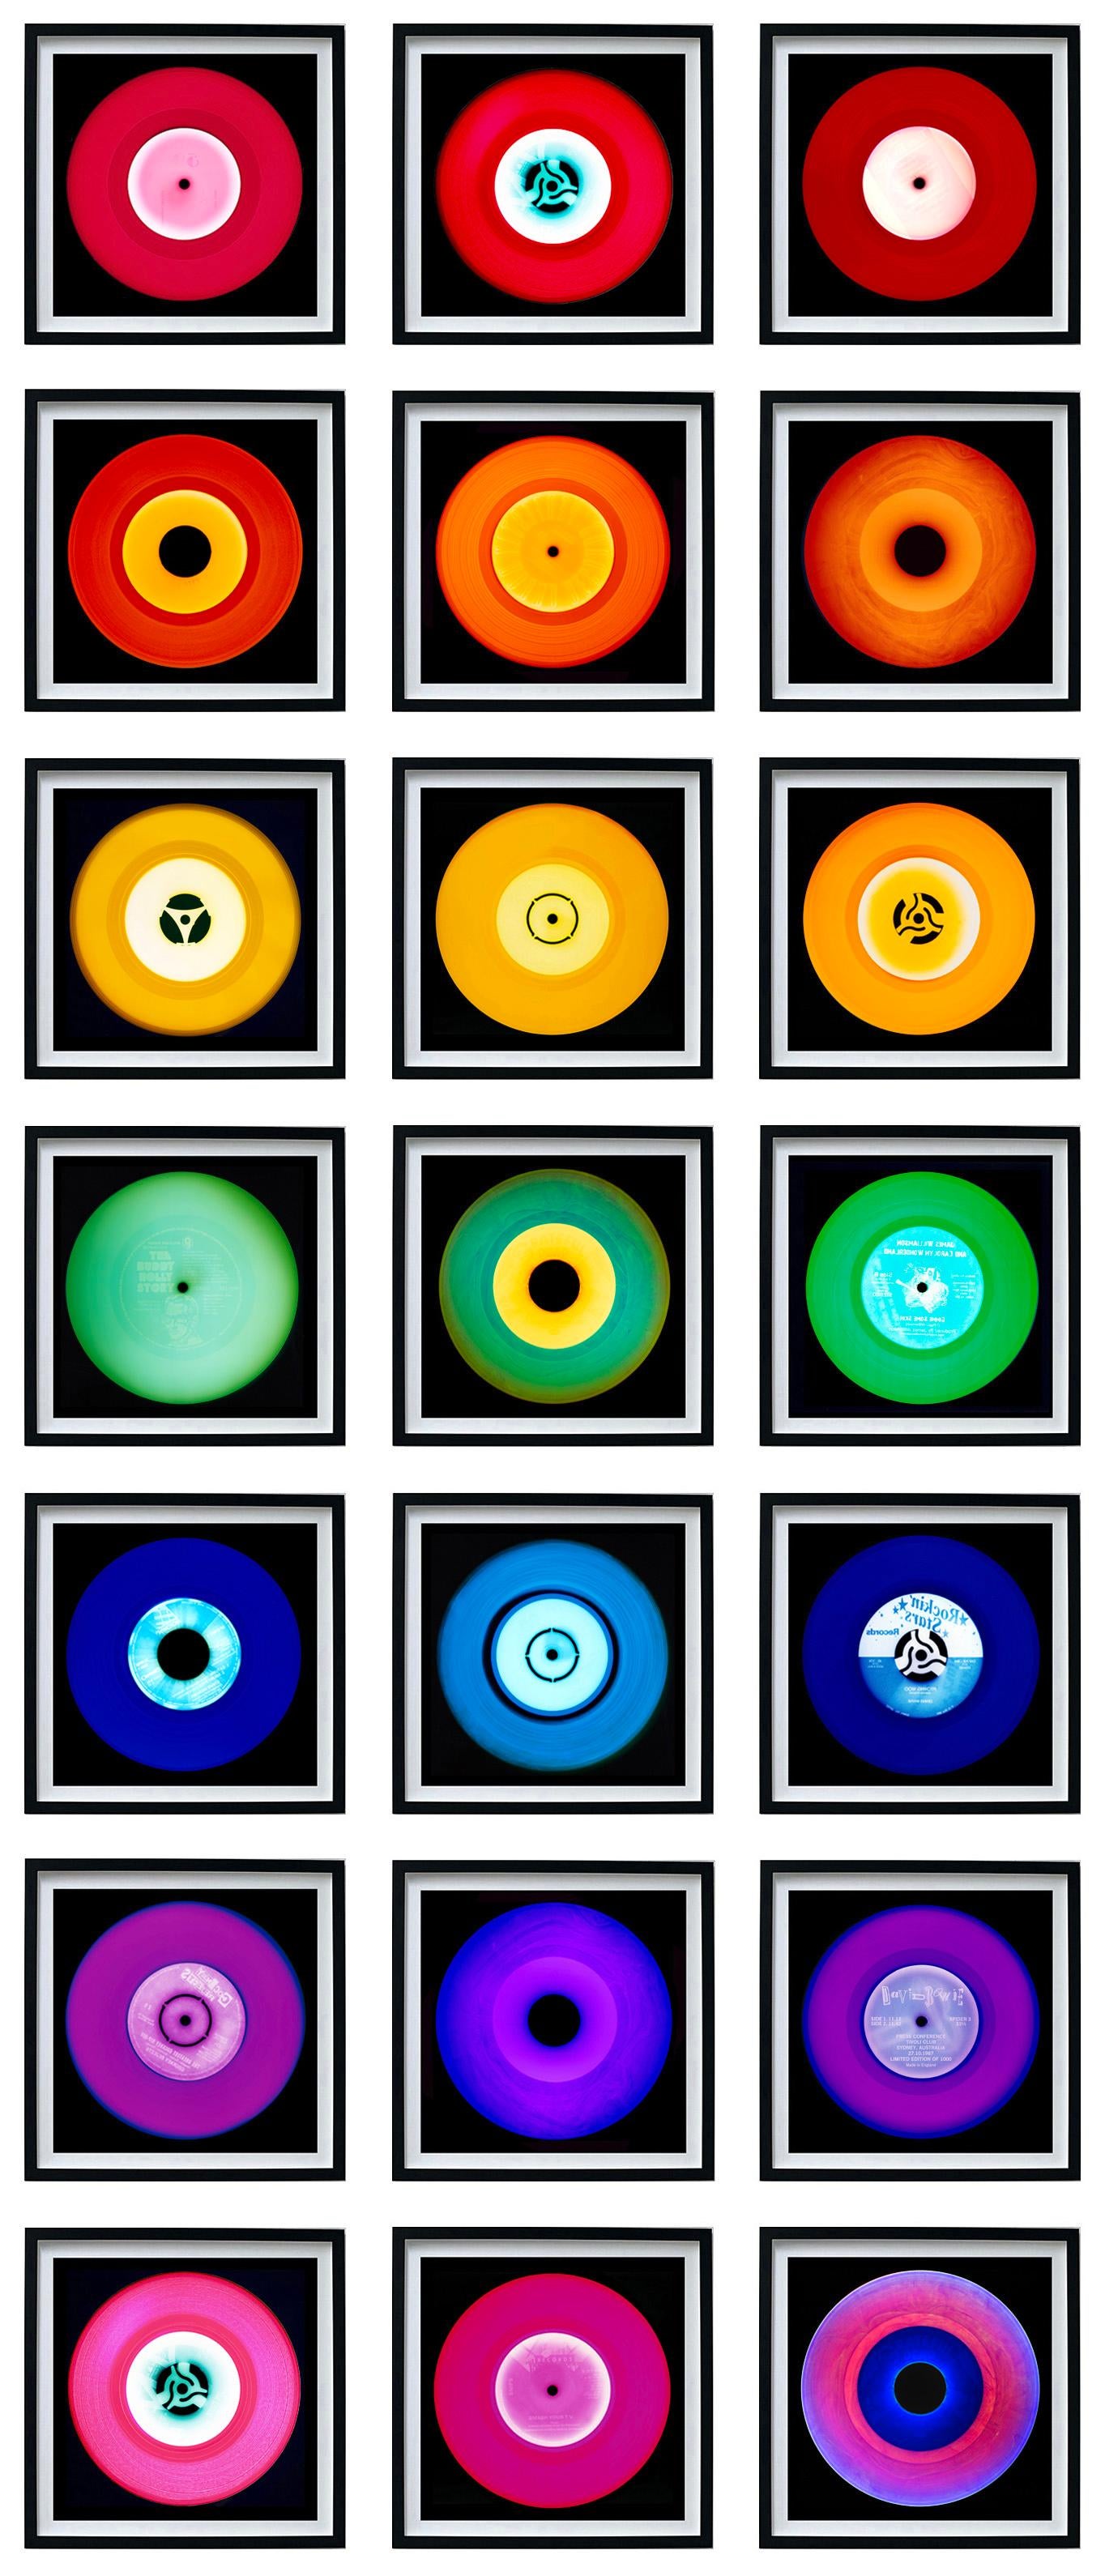 Vinyl Collection 21 Piece Rainbow Installation - Pop Art Color Photography - Print by Heidler & Heeps